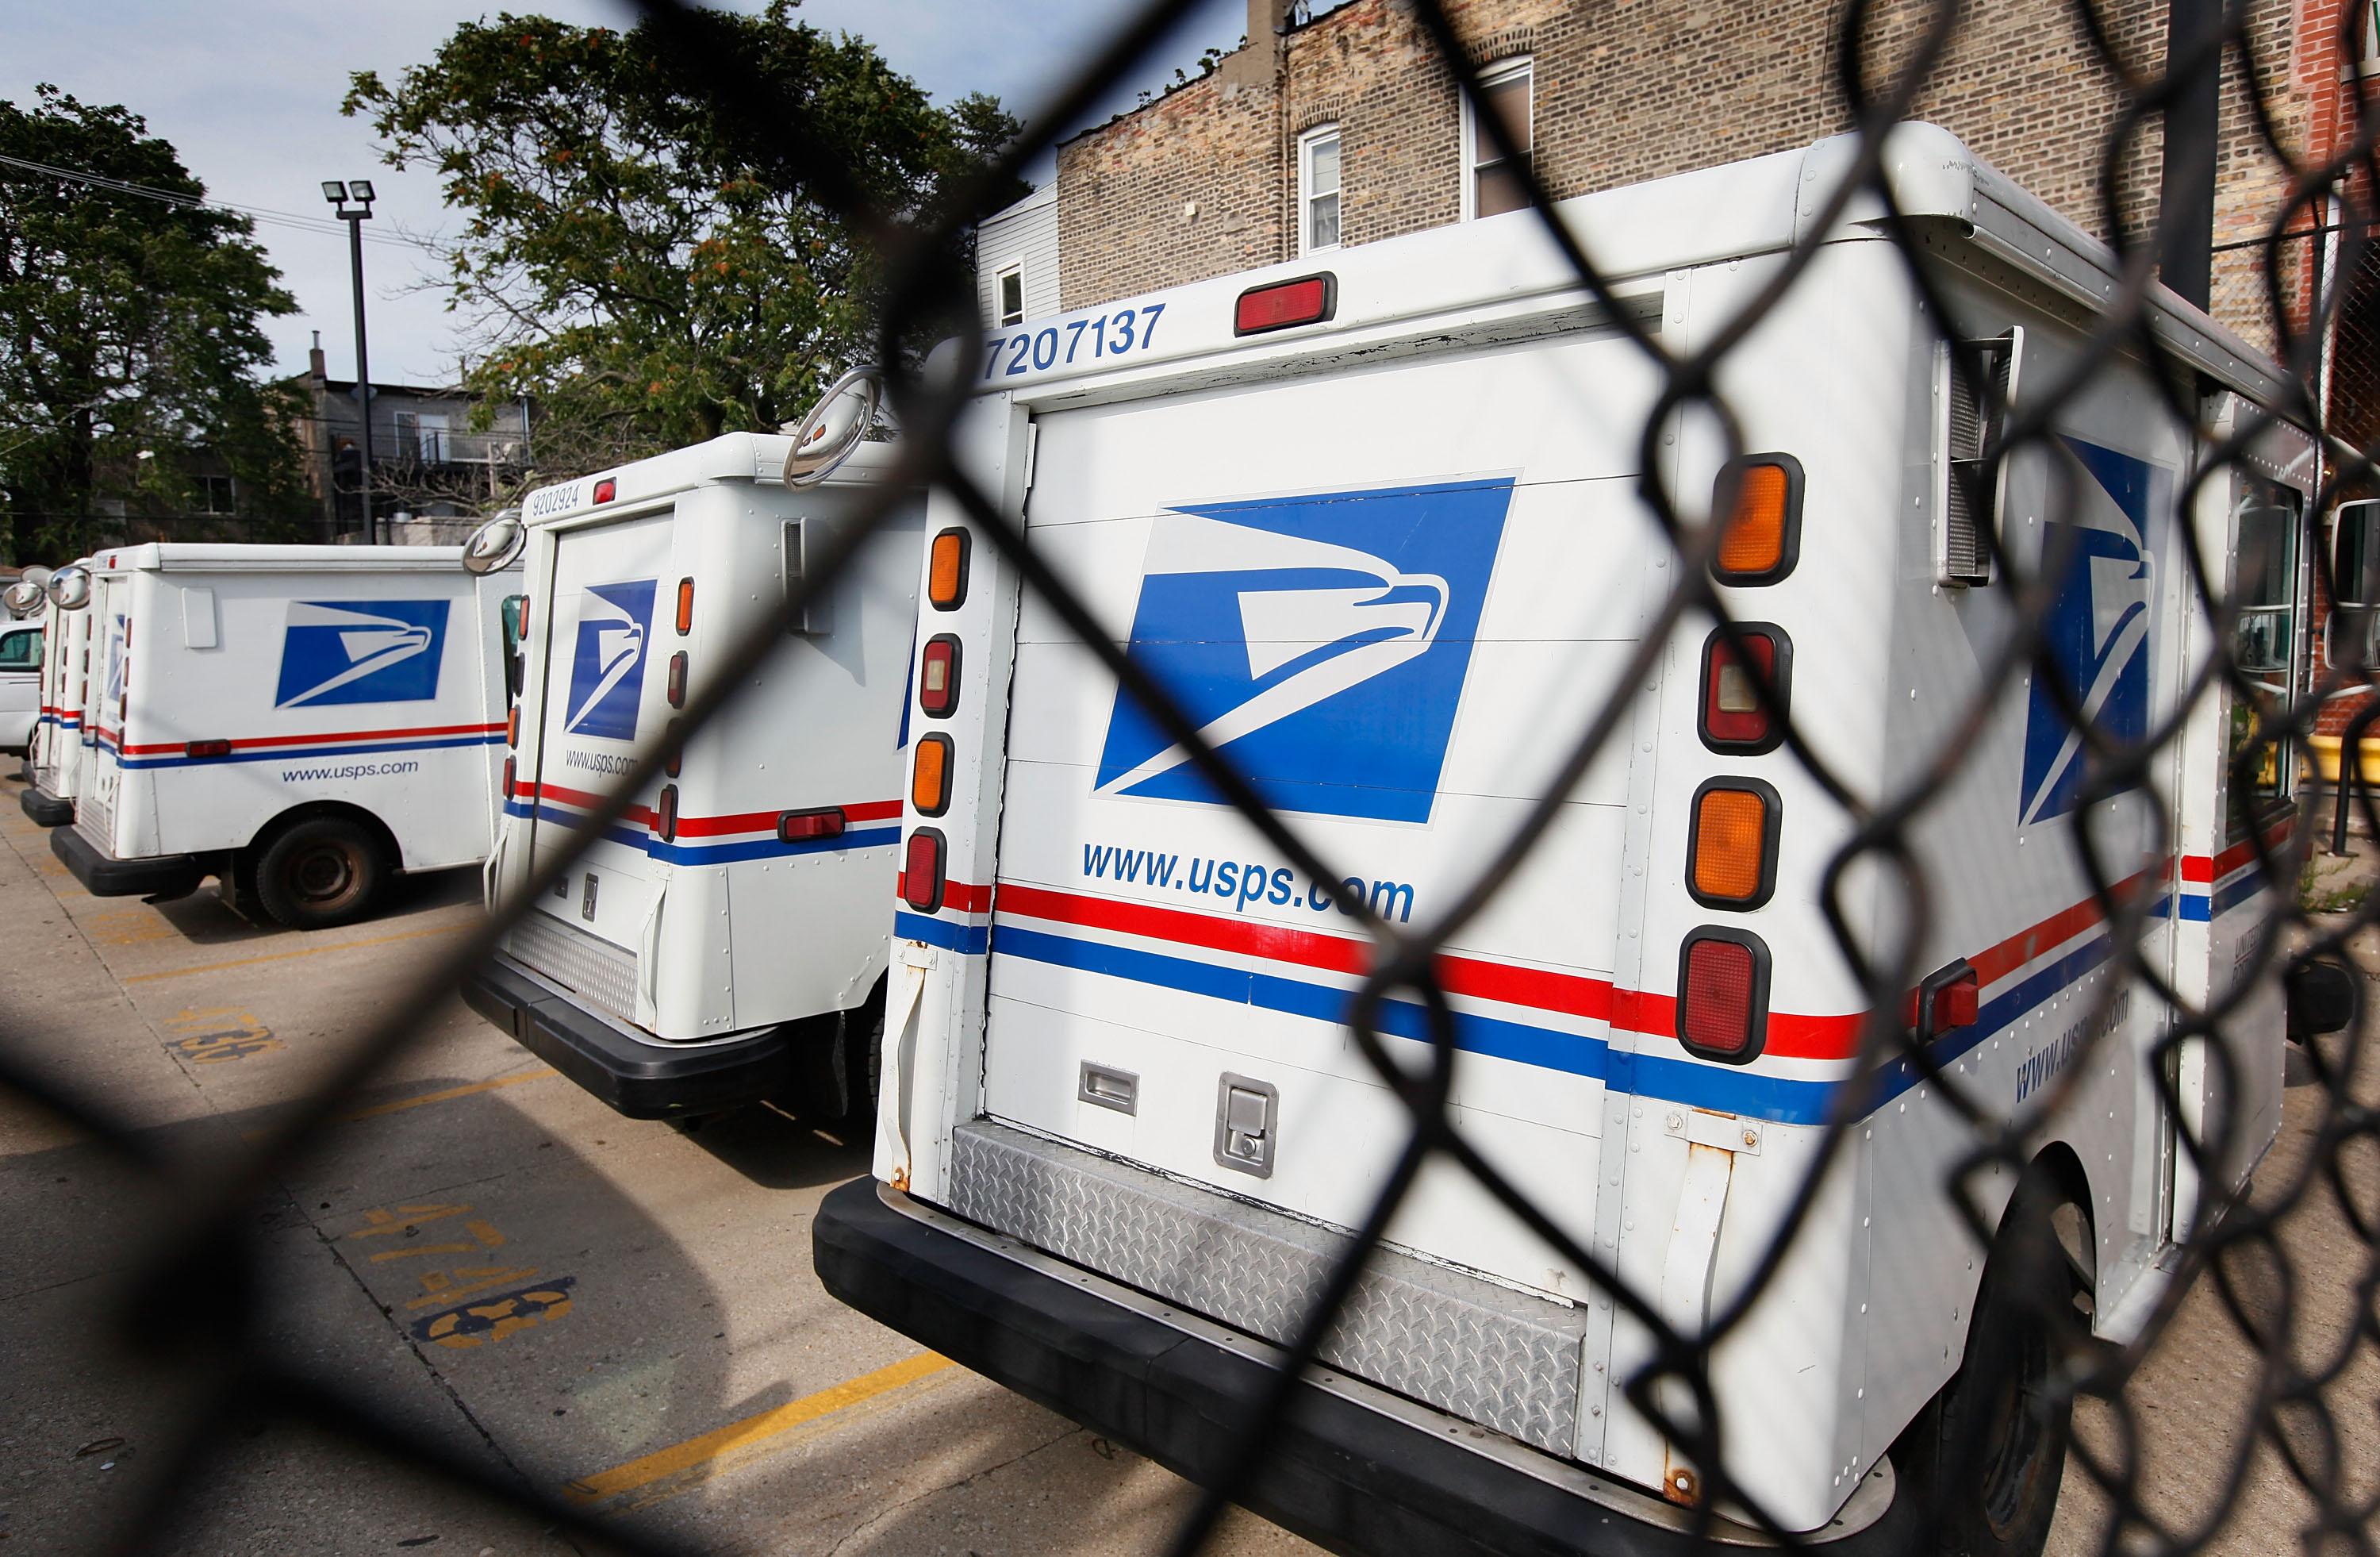 Why Is the U.S. Postal Service in Trouble and What Can We Do to Help?